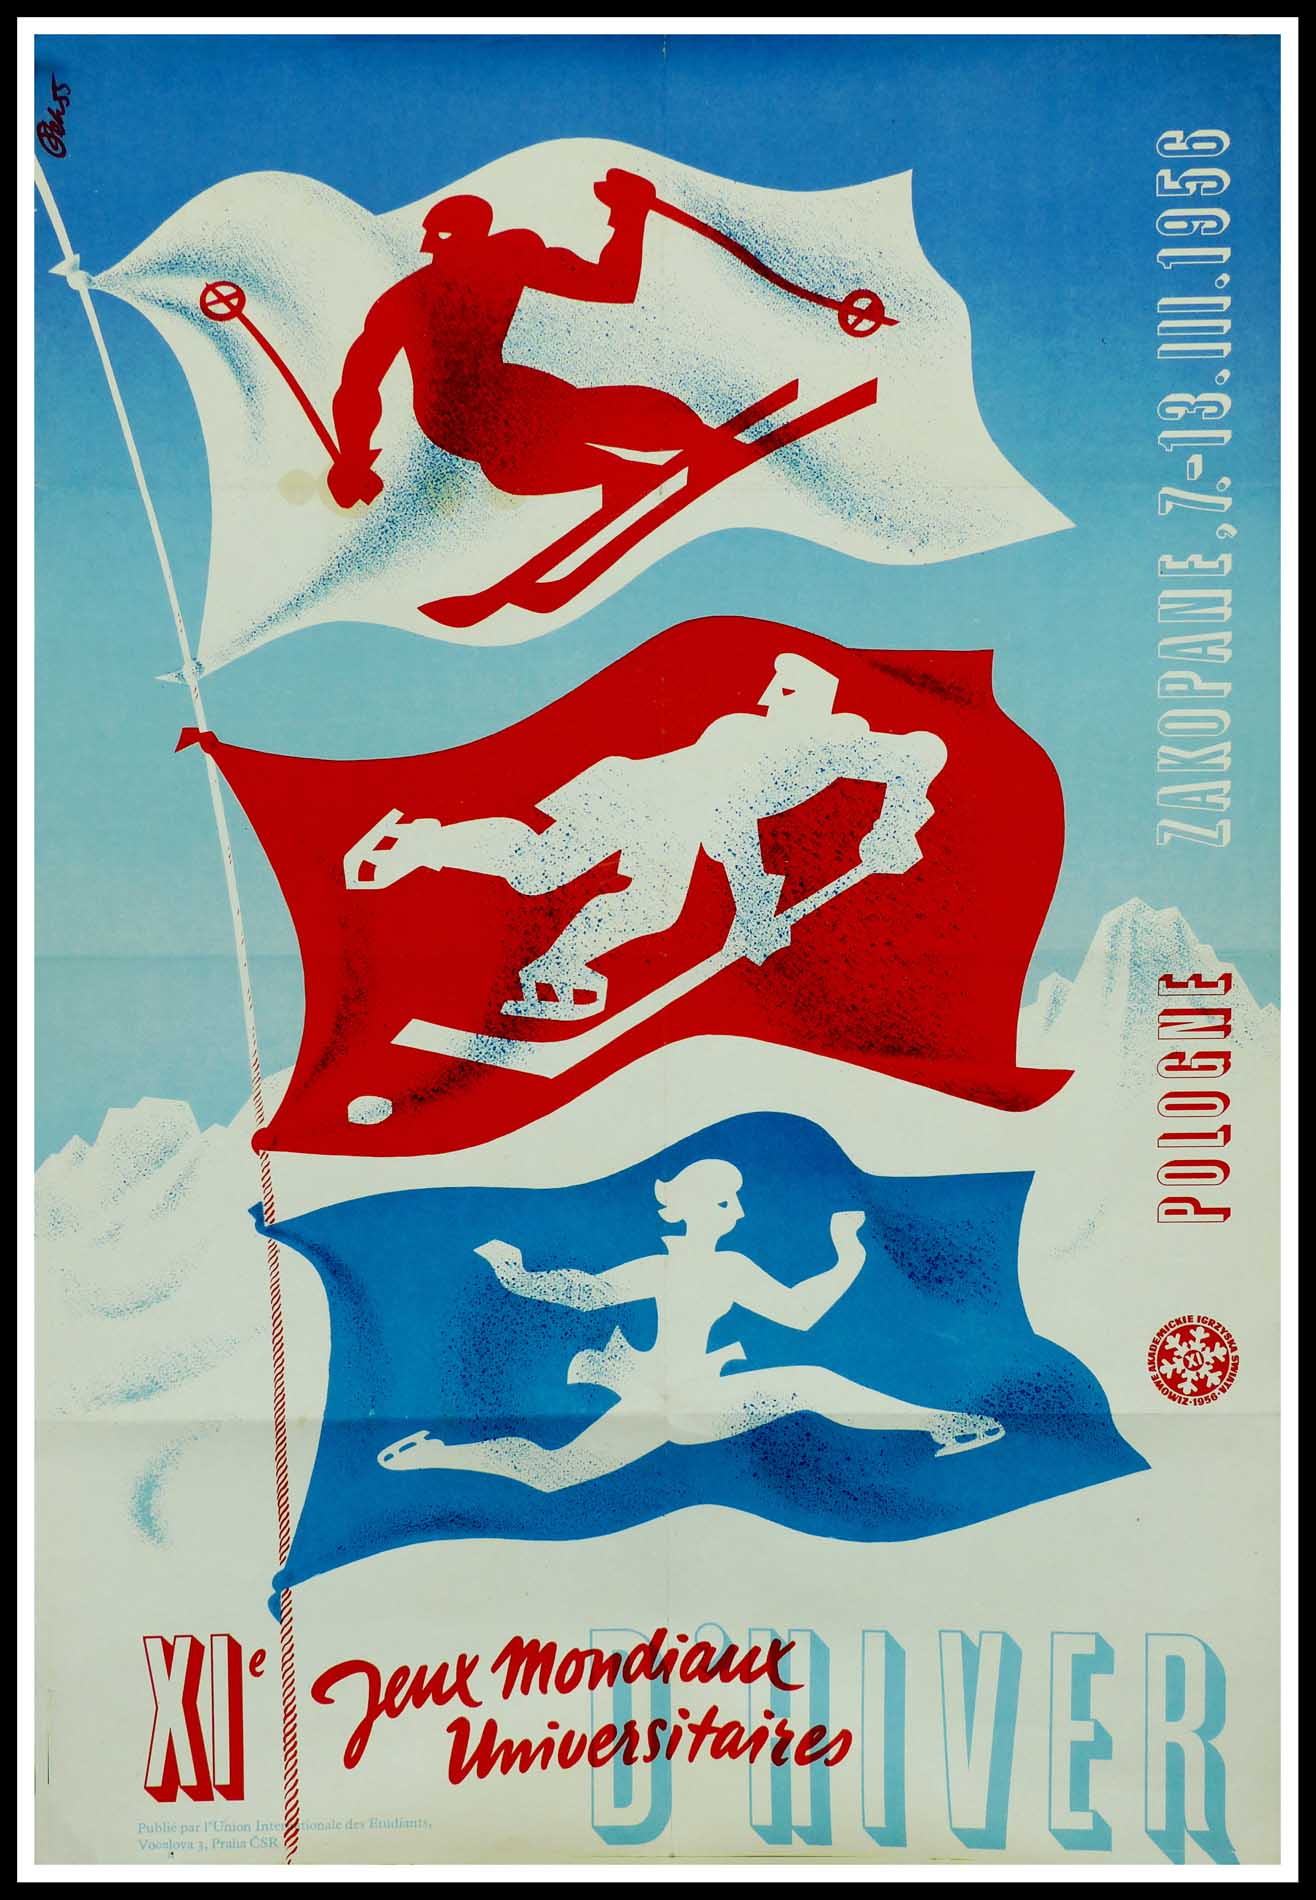 (alt="Original vintage poster, XI World University Winter Games in Poland - 1956 signed in the plate by Pek55 and printed by : L'UIE")